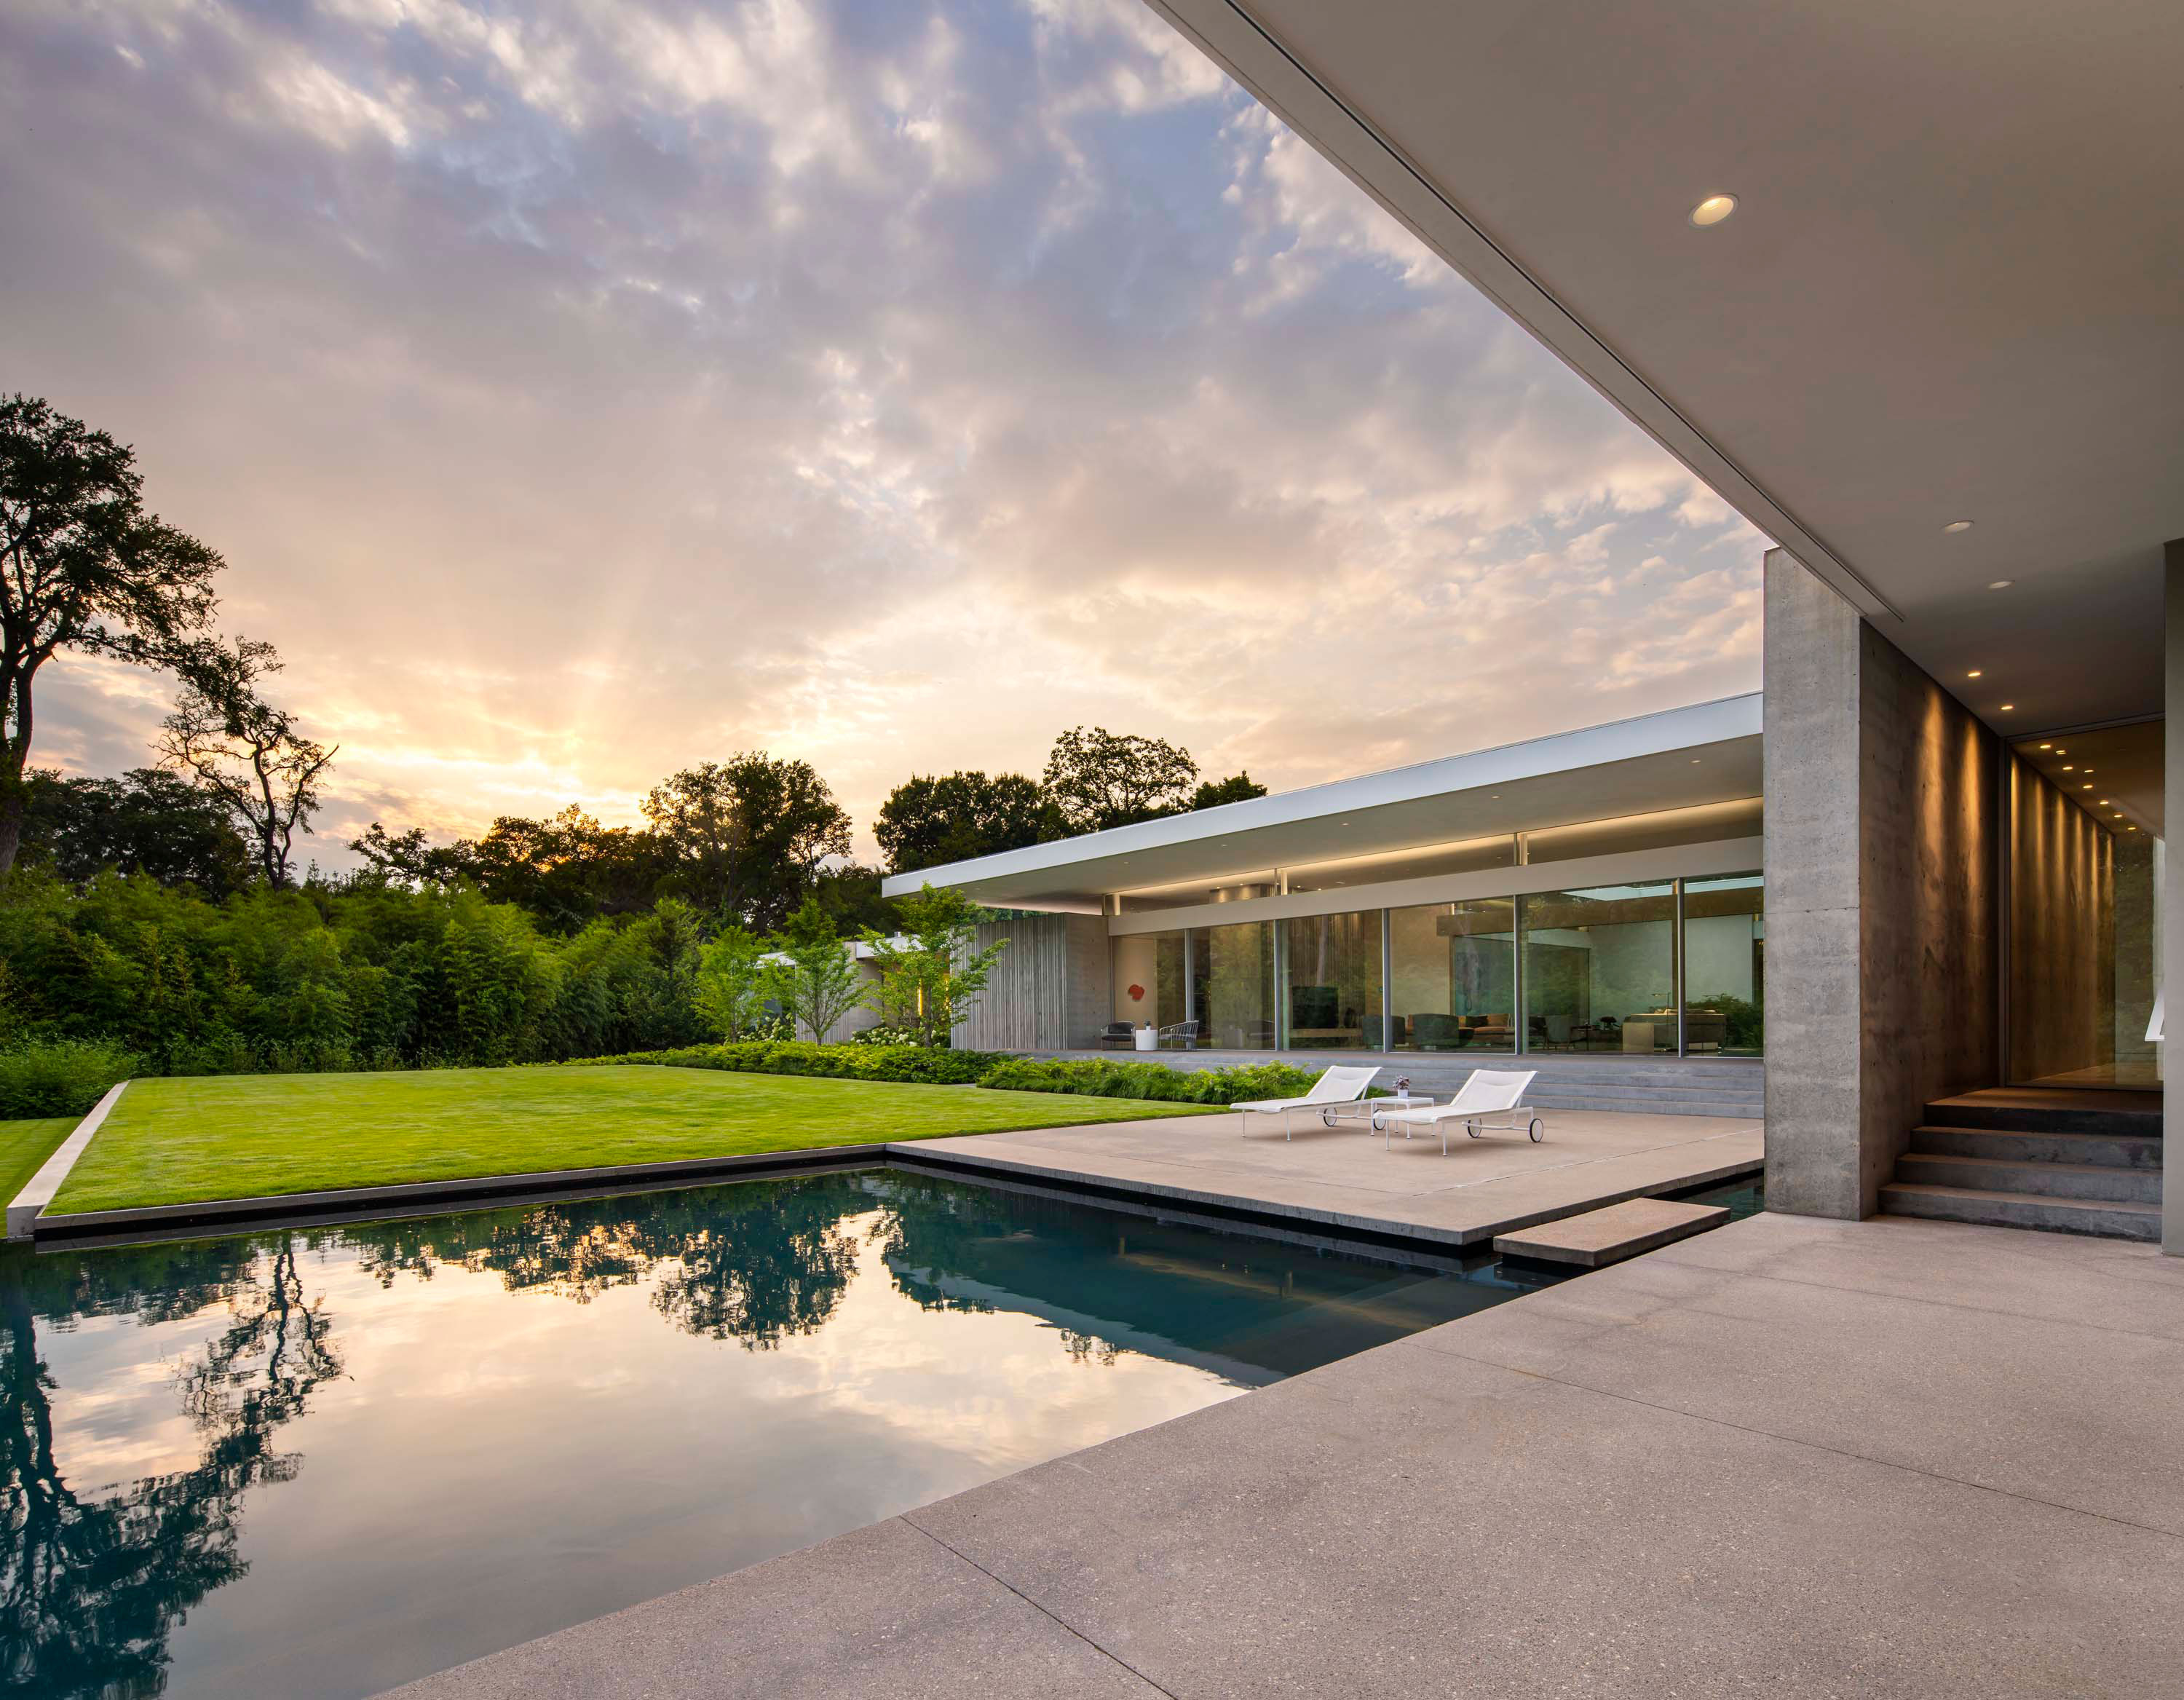 Exterior photo of the Preston Hollow Residence by Specht Novak Architects. Shot at sunrise by Manolo Langis, featuring an entry hallway, the pool, yard, lounging areas, and glowing home.